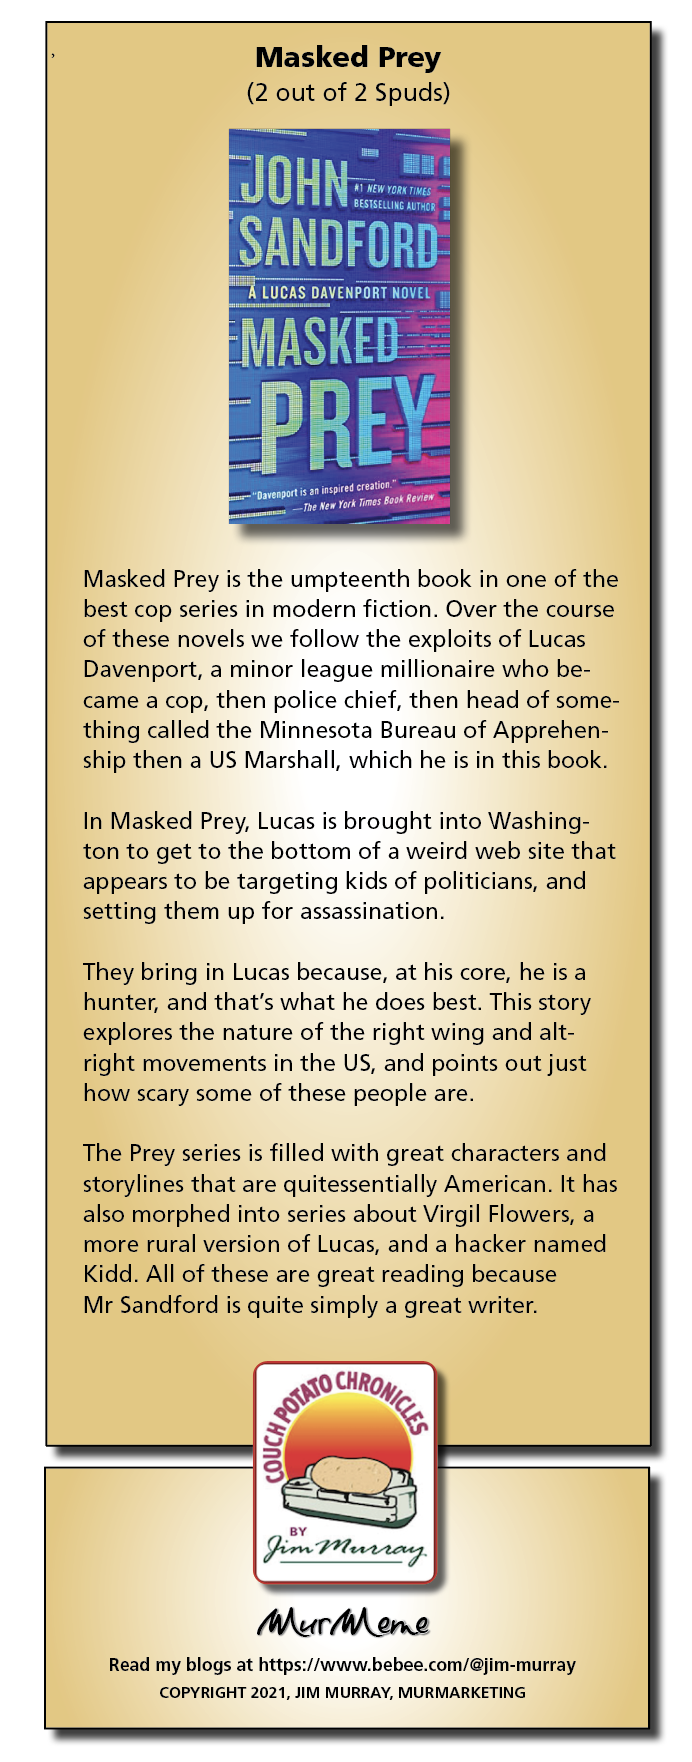 Masked Prey
(2 out of 2 Spuds)

 

Masked Prey is the umpteenth book in one of the
best cop series in modern fiction. Over the course
of these novels we follow the exploits of Lucas
Davenport, a minor league millionaire who be-
came a cop, then police chief, then head of some-
thing called the Minnesota Bureau of Apprehen-
ship then a US Marshall, which he is in this book.

In Masked Prey, Lucas is brought into Washing-
ton to get to the bottom of a weird web site that
appears to be targeting kids of politicians, and
setting them up for assassination

They bring in Lucas because, at his core, he is a
hunter, and that's what he does best. This story
explores the nature of the right wing and alt-
right movements in the US, and points out just
how scary some of these people are.

The Prey series is filled with great characters and
storylines that are quitessentially American. It has
also morphed into series about Virgil Flowers, a
more rural version of Lucas, and a hacker named
Kidd. All of these are great reading because

Mr Sandford is quite simply a great writer.

   

sy
H rn Peer tag

Mur ene

Read my blogs at https://www.bebee.com/@jim-murray
COPYRIGHT 2021. JIM MURRAY, MURMARKETING